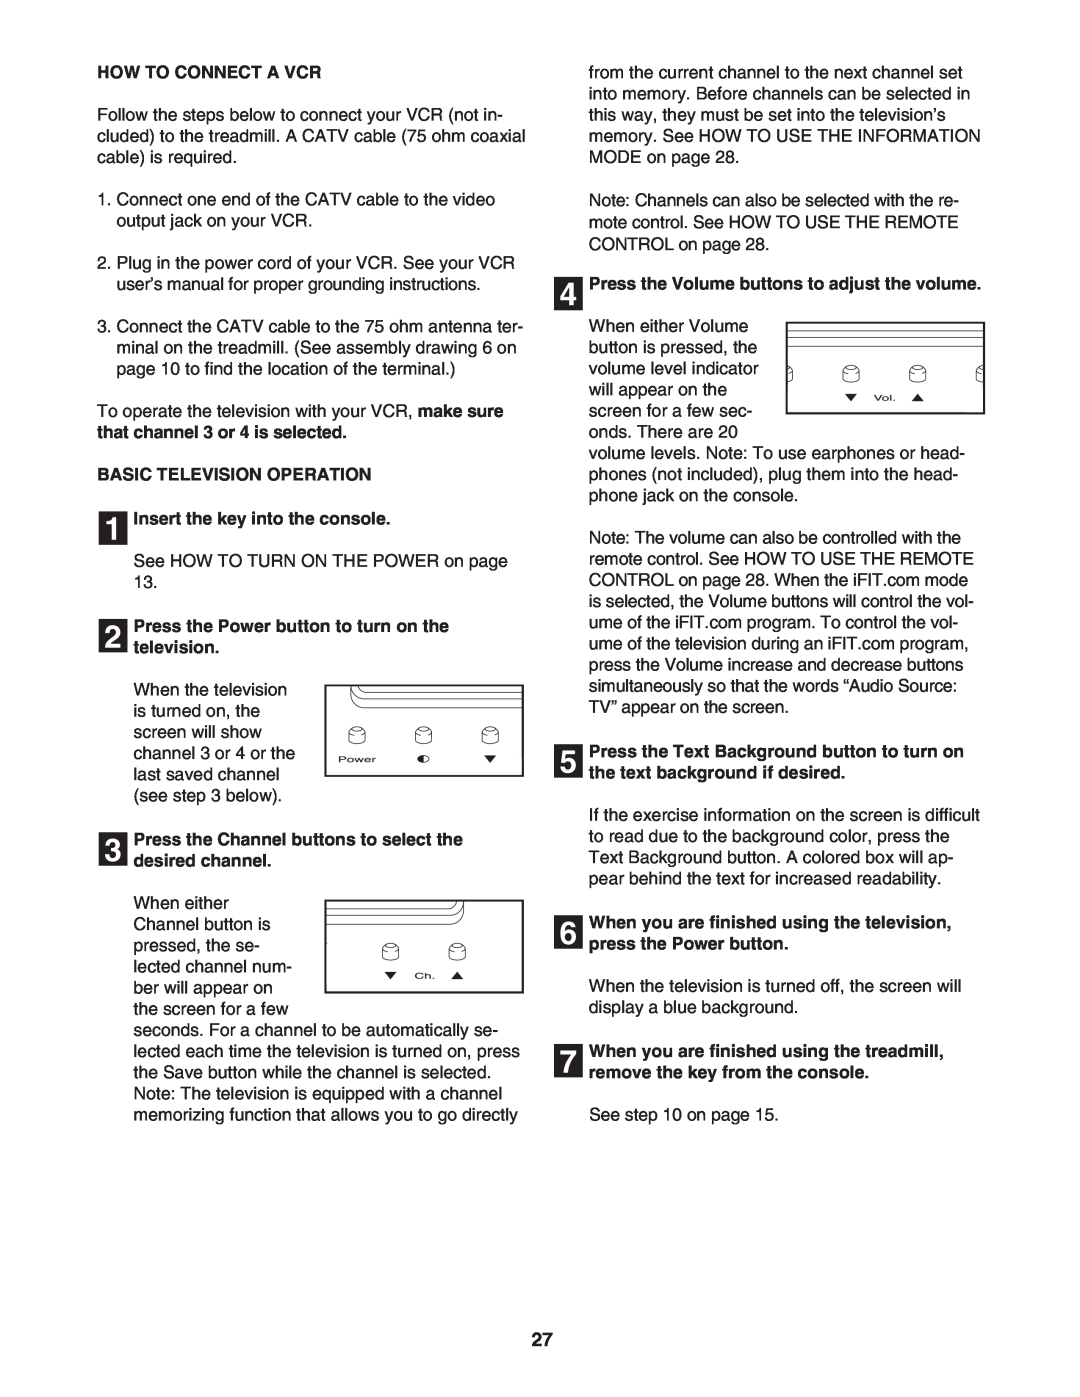 NordicTrack NTL2495.3 manual How To Connect A Vcr, BASIC TELEVISION OPERATION 1 Insert the key into the console 